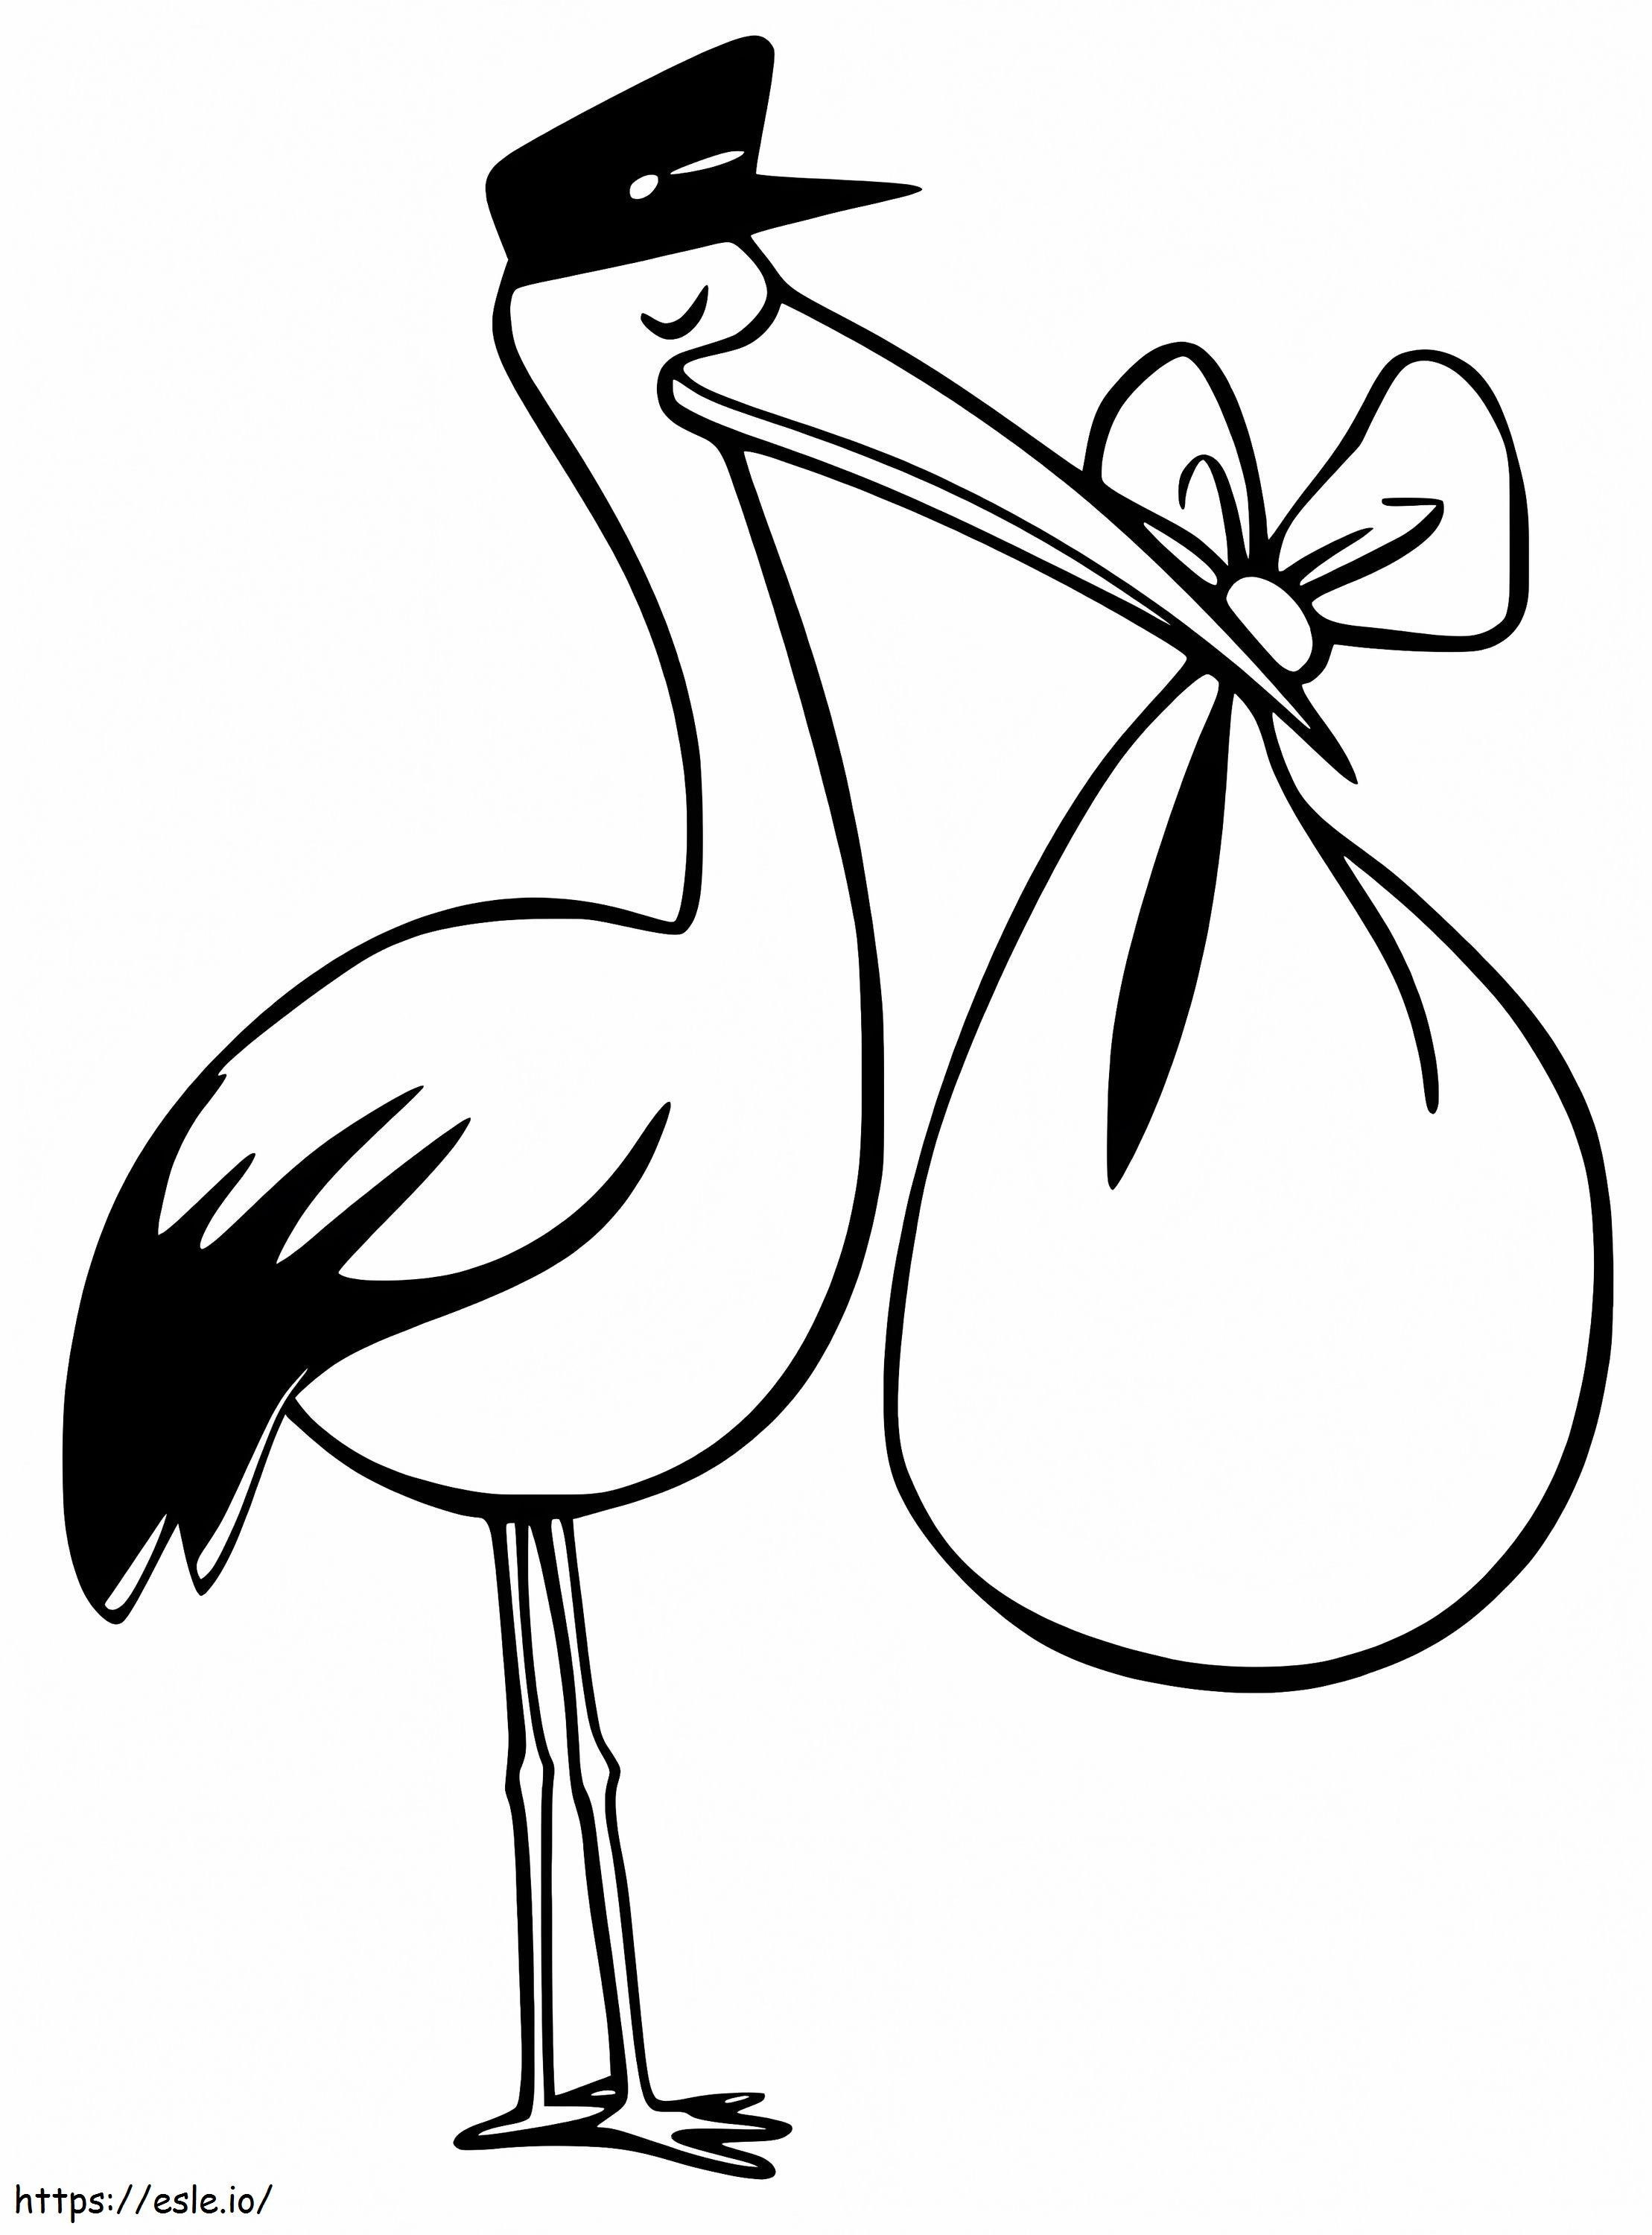 Delivery Stork coloring page